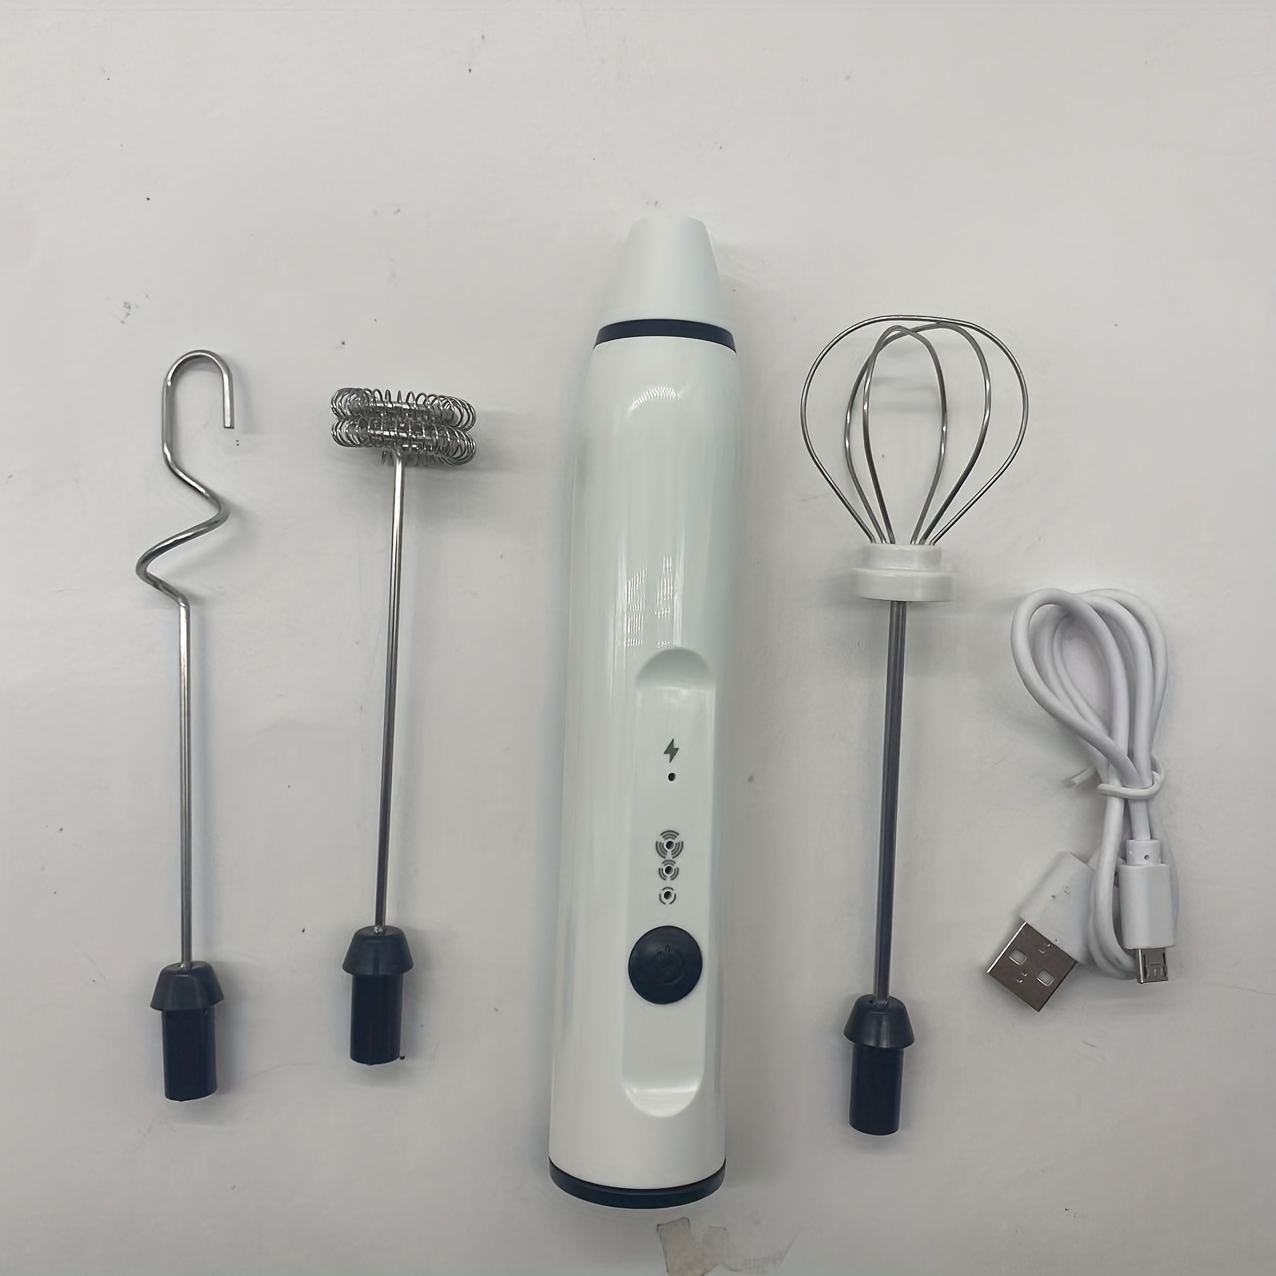 Coffee Cream Mixer Mini Electrical Wireless Handheld Blender Milk Frothers  Coffee Maker SILVER 